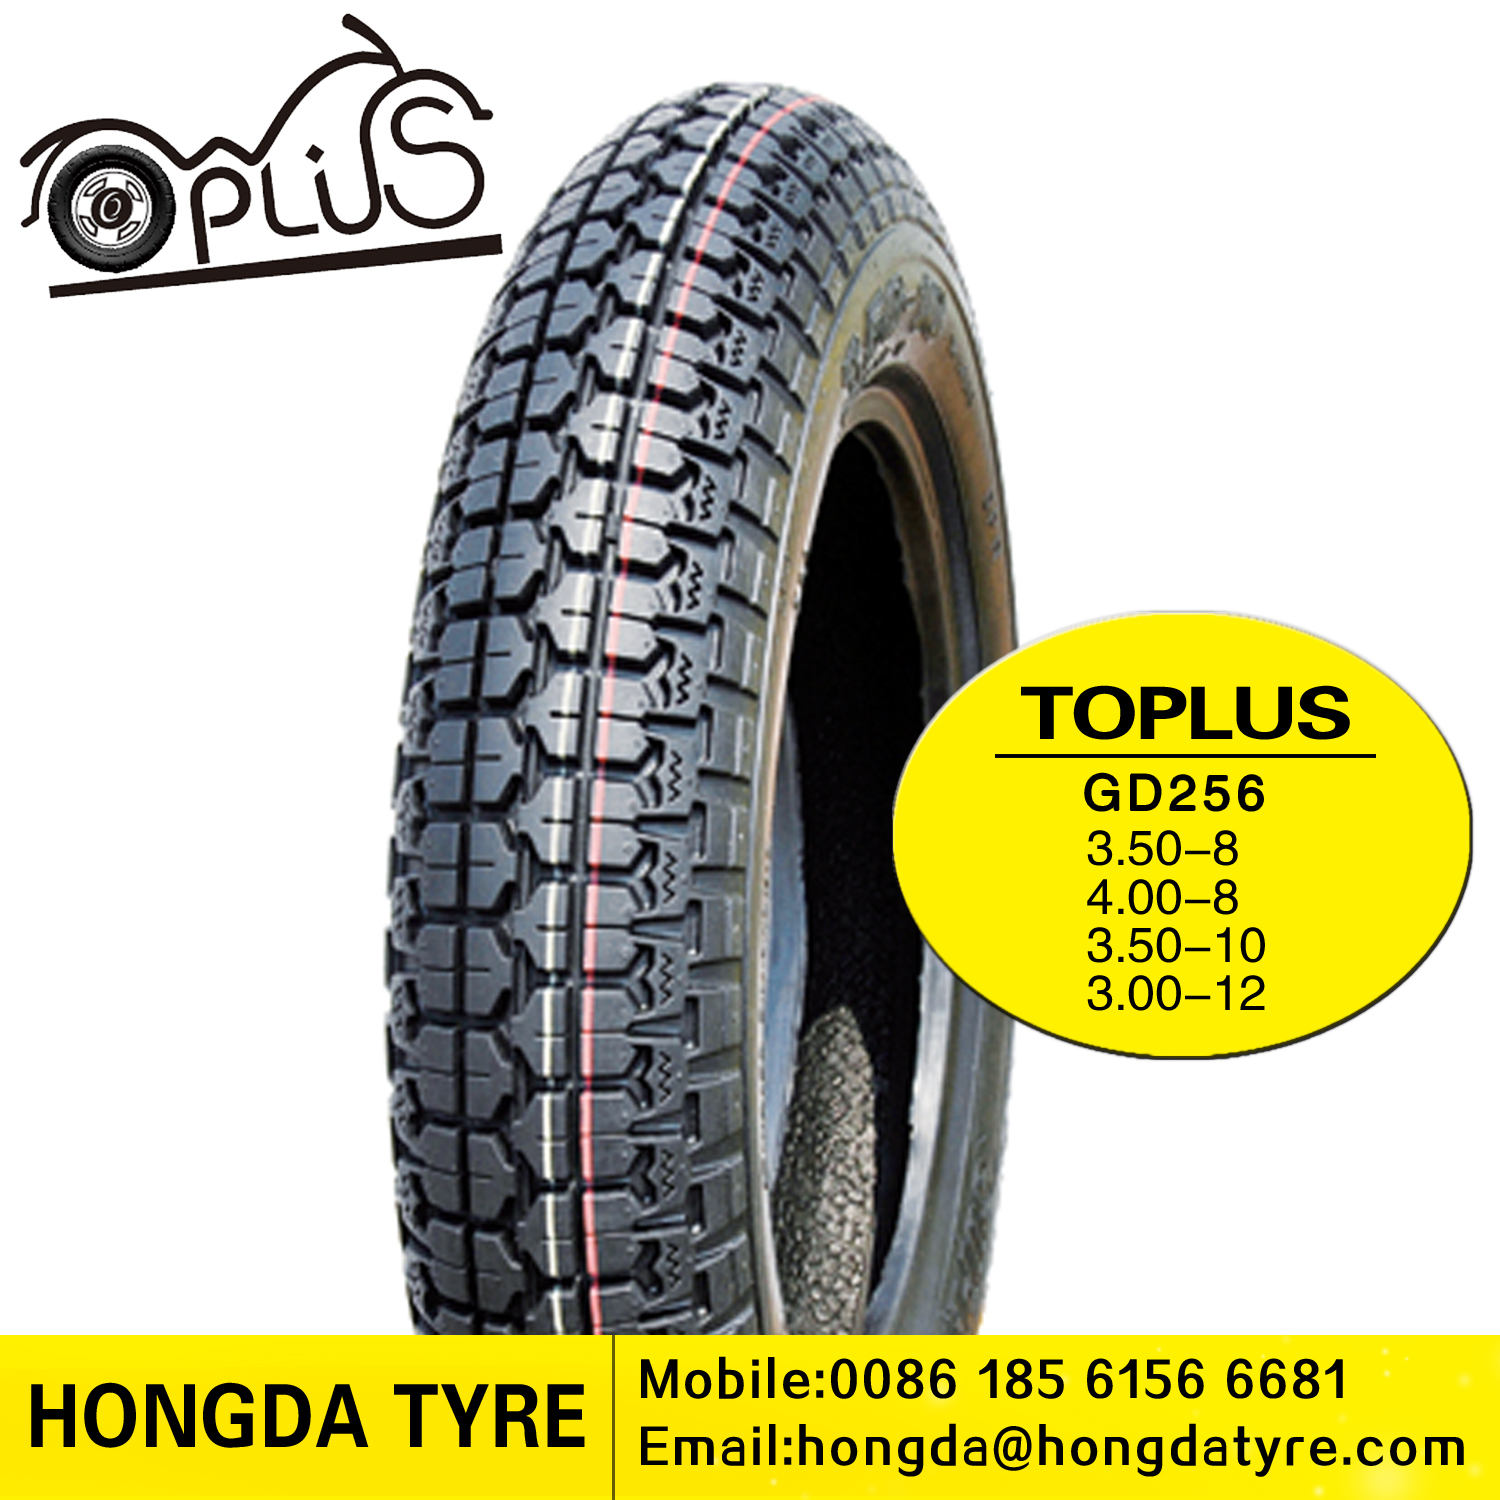 Motorcycle tyre GD256